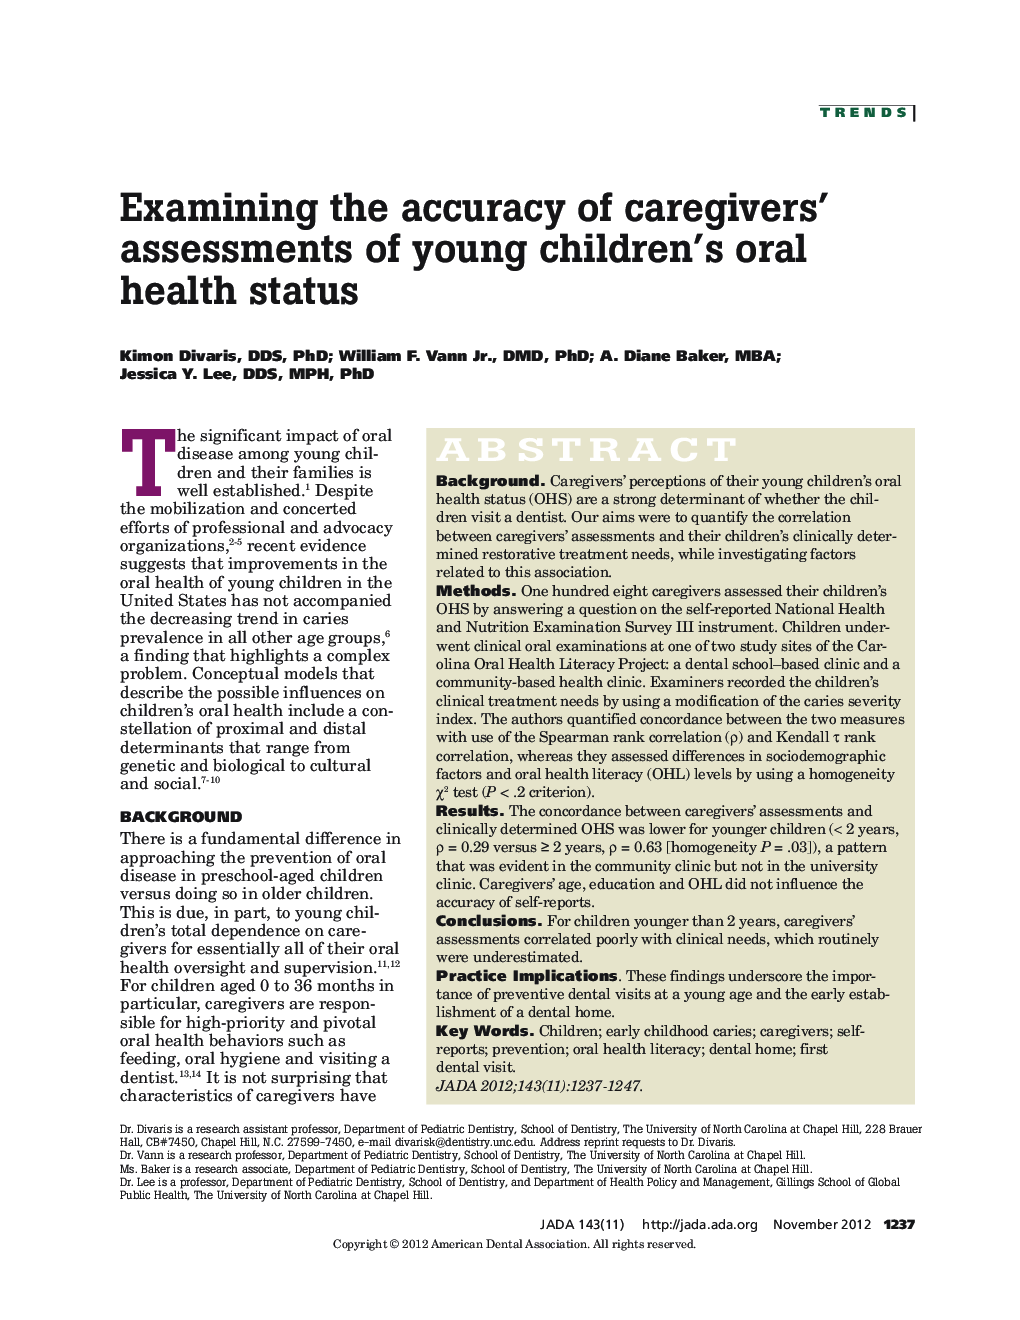 Examining the accuracy of caregivers' assessments of young children's oral health status 